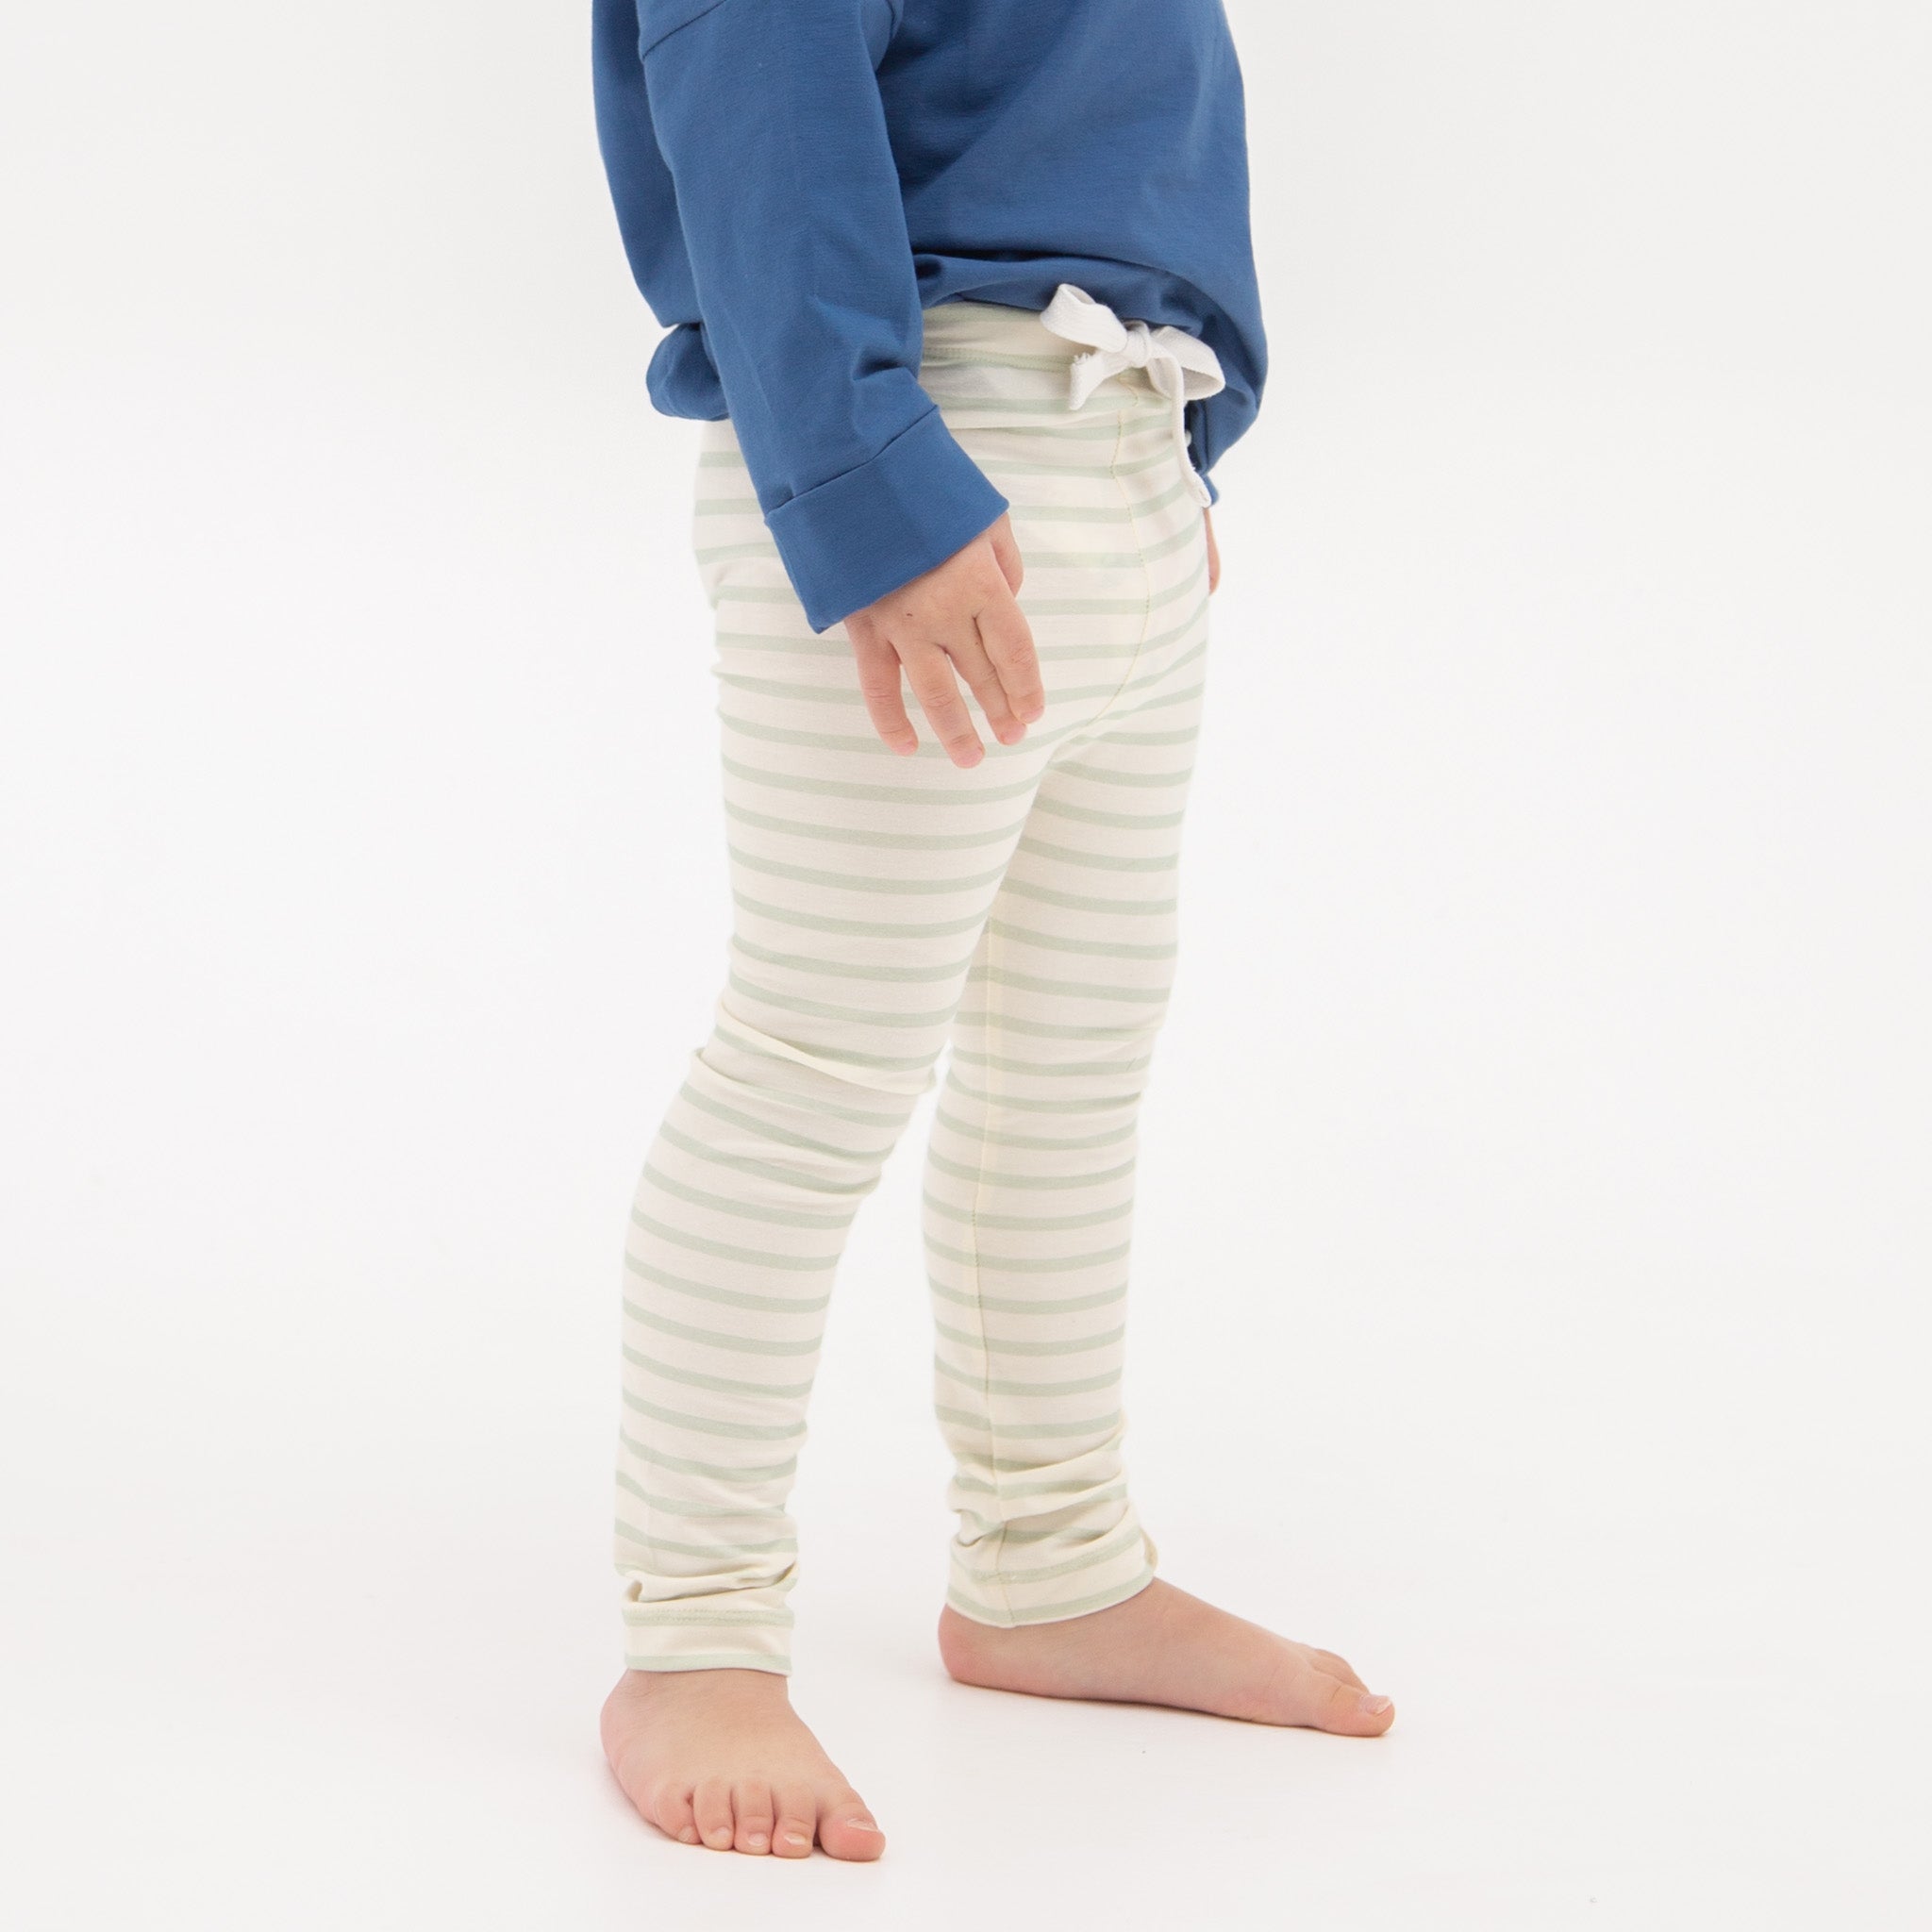 Baby and Children Legging Pants - Striped